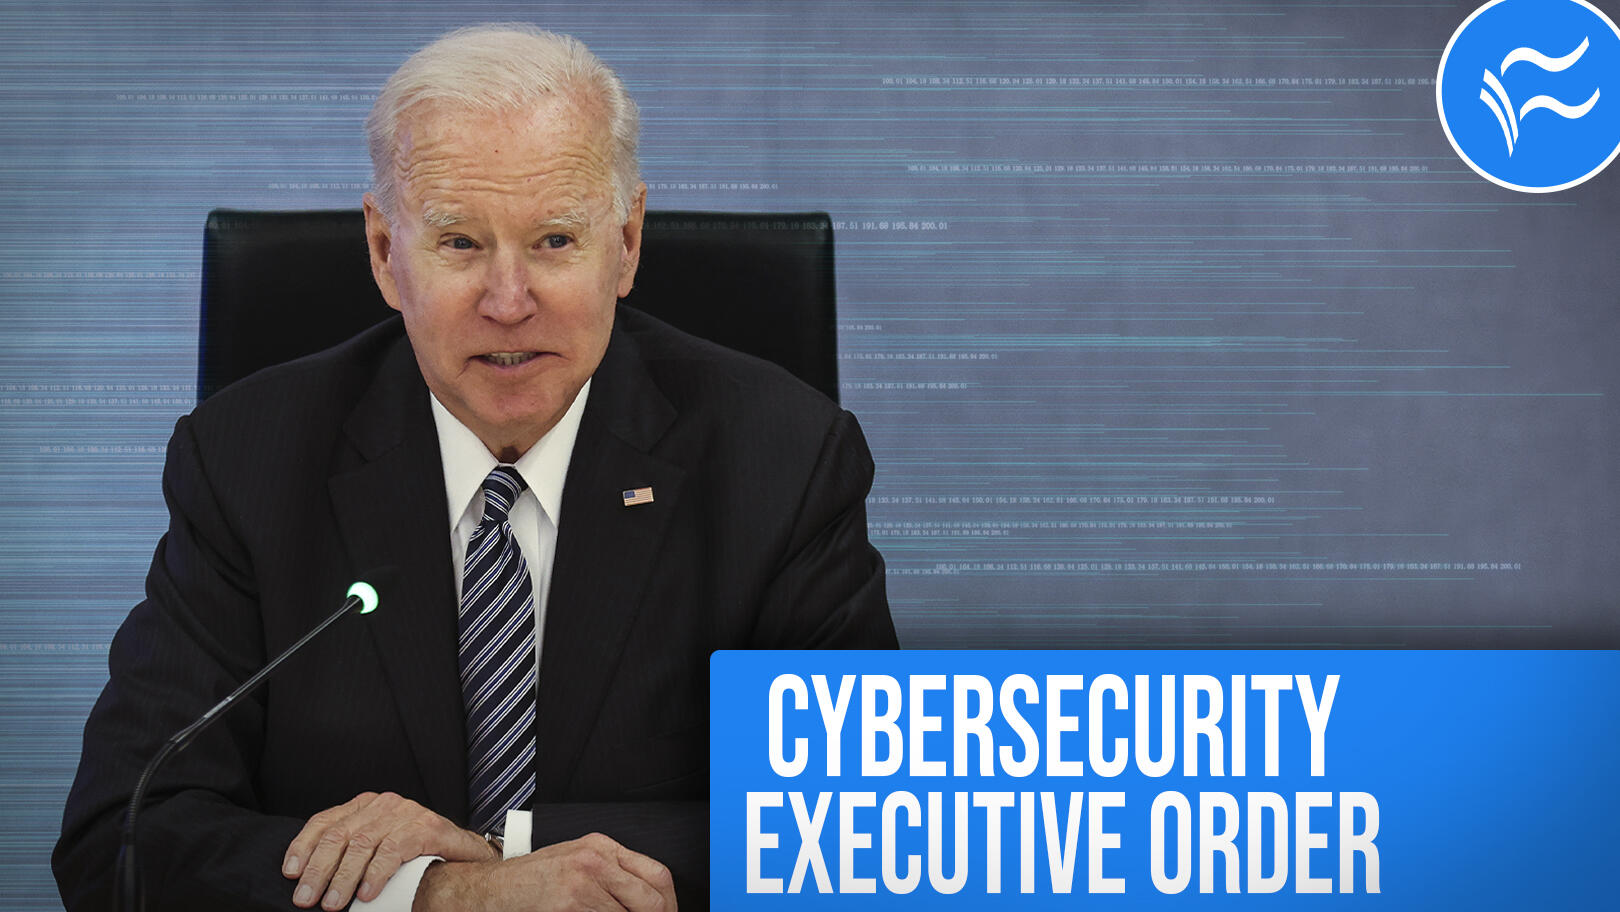 Some cybersecurity weak spots will be strengthened by Biden's executive order, expert says